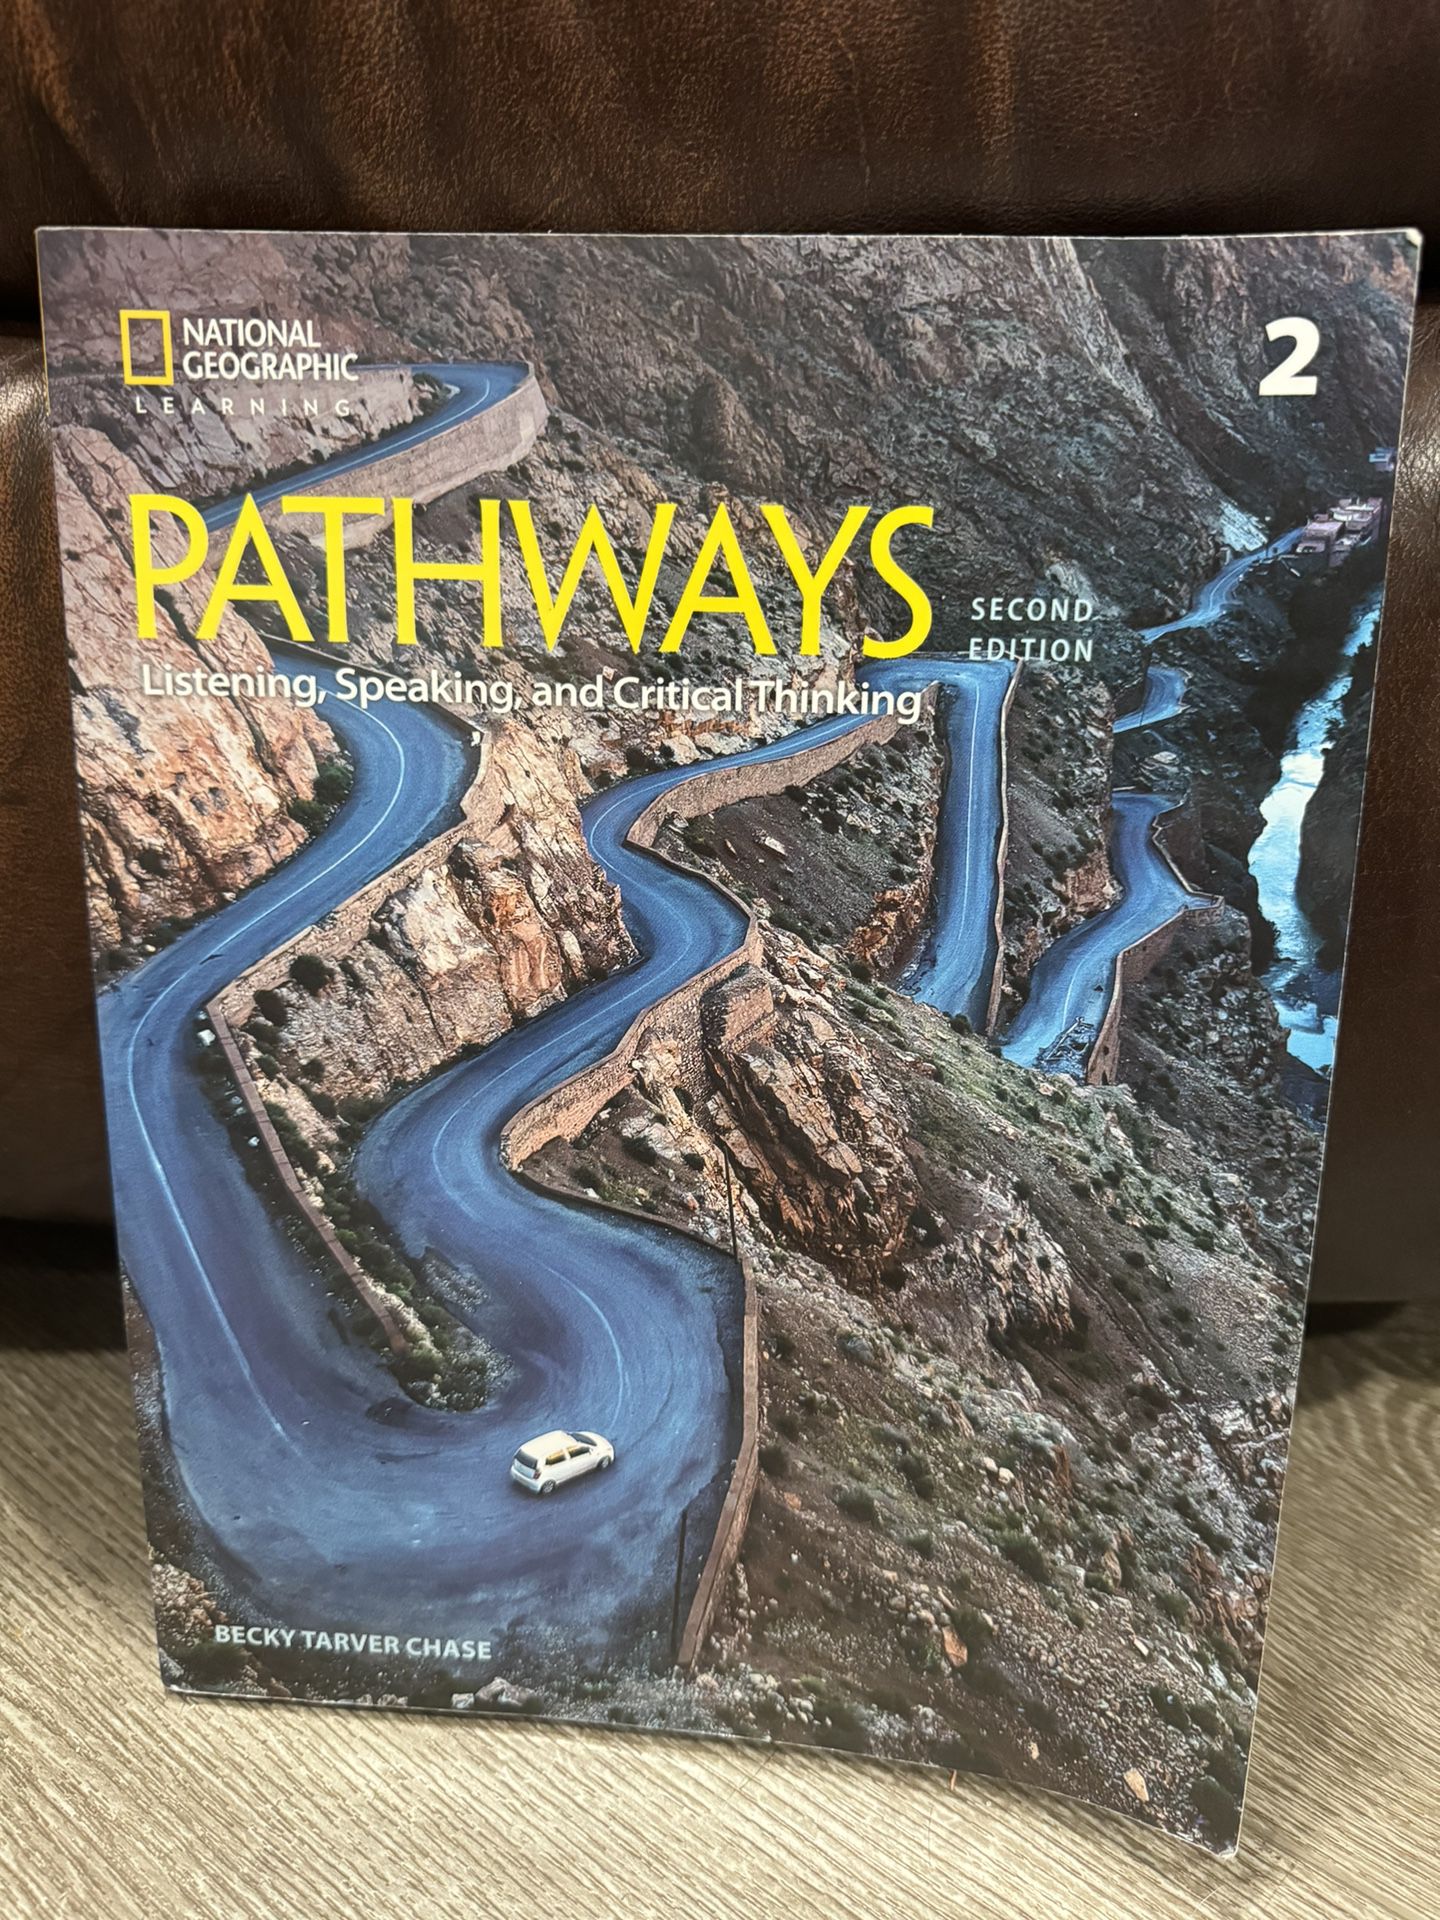 Pathways Listening, Speaking and Critical Thinking 2nd Edition